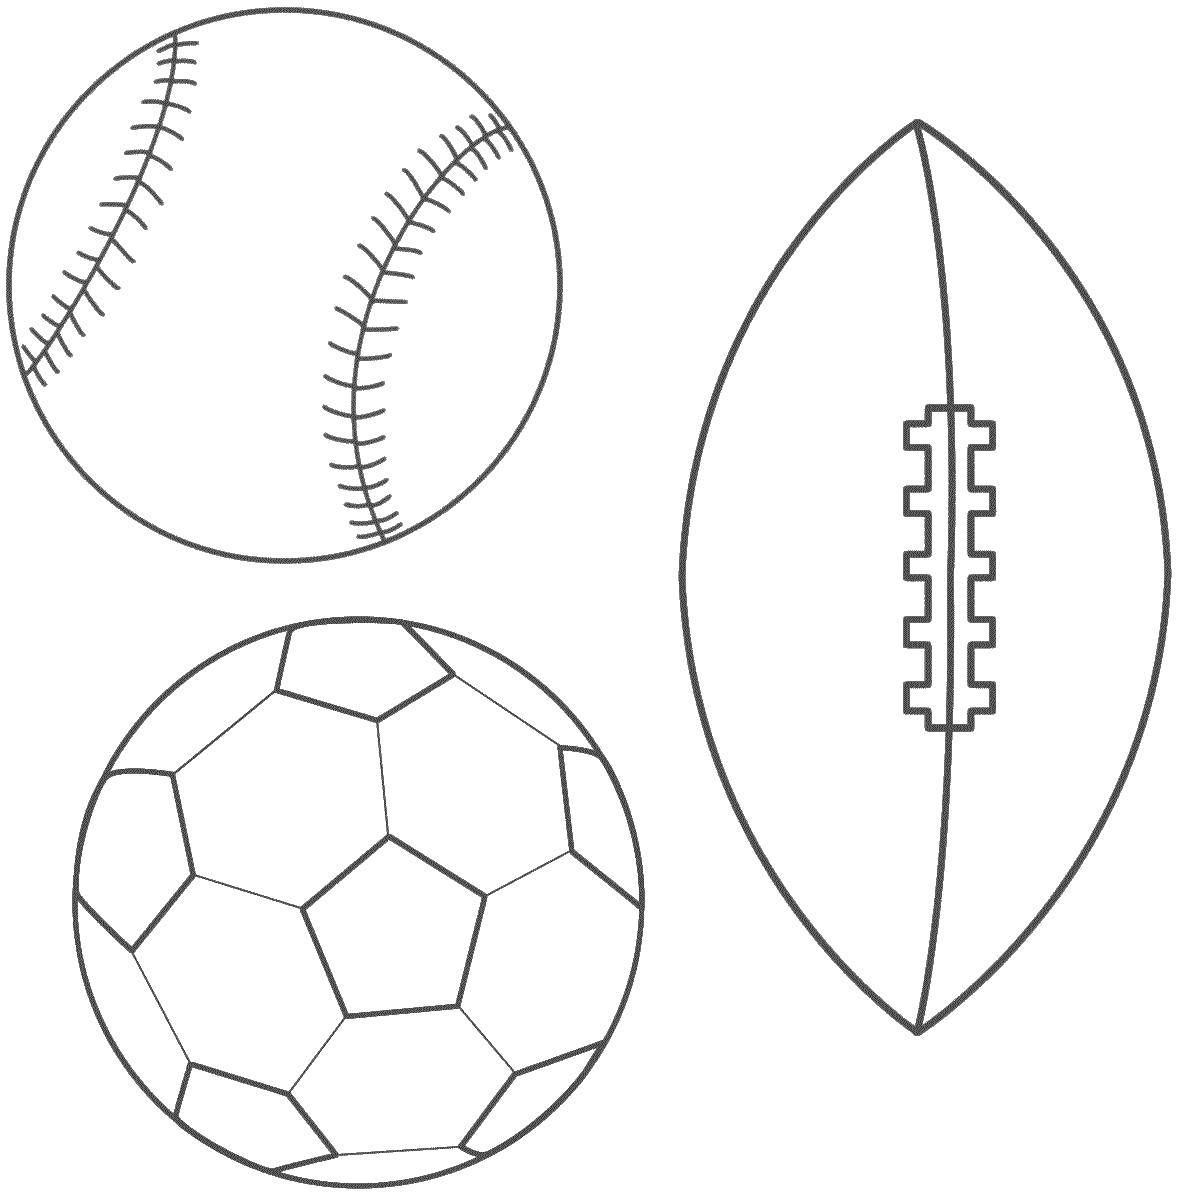 Coloring Balls for sports. Category Sports. Tags:  sports, balls.